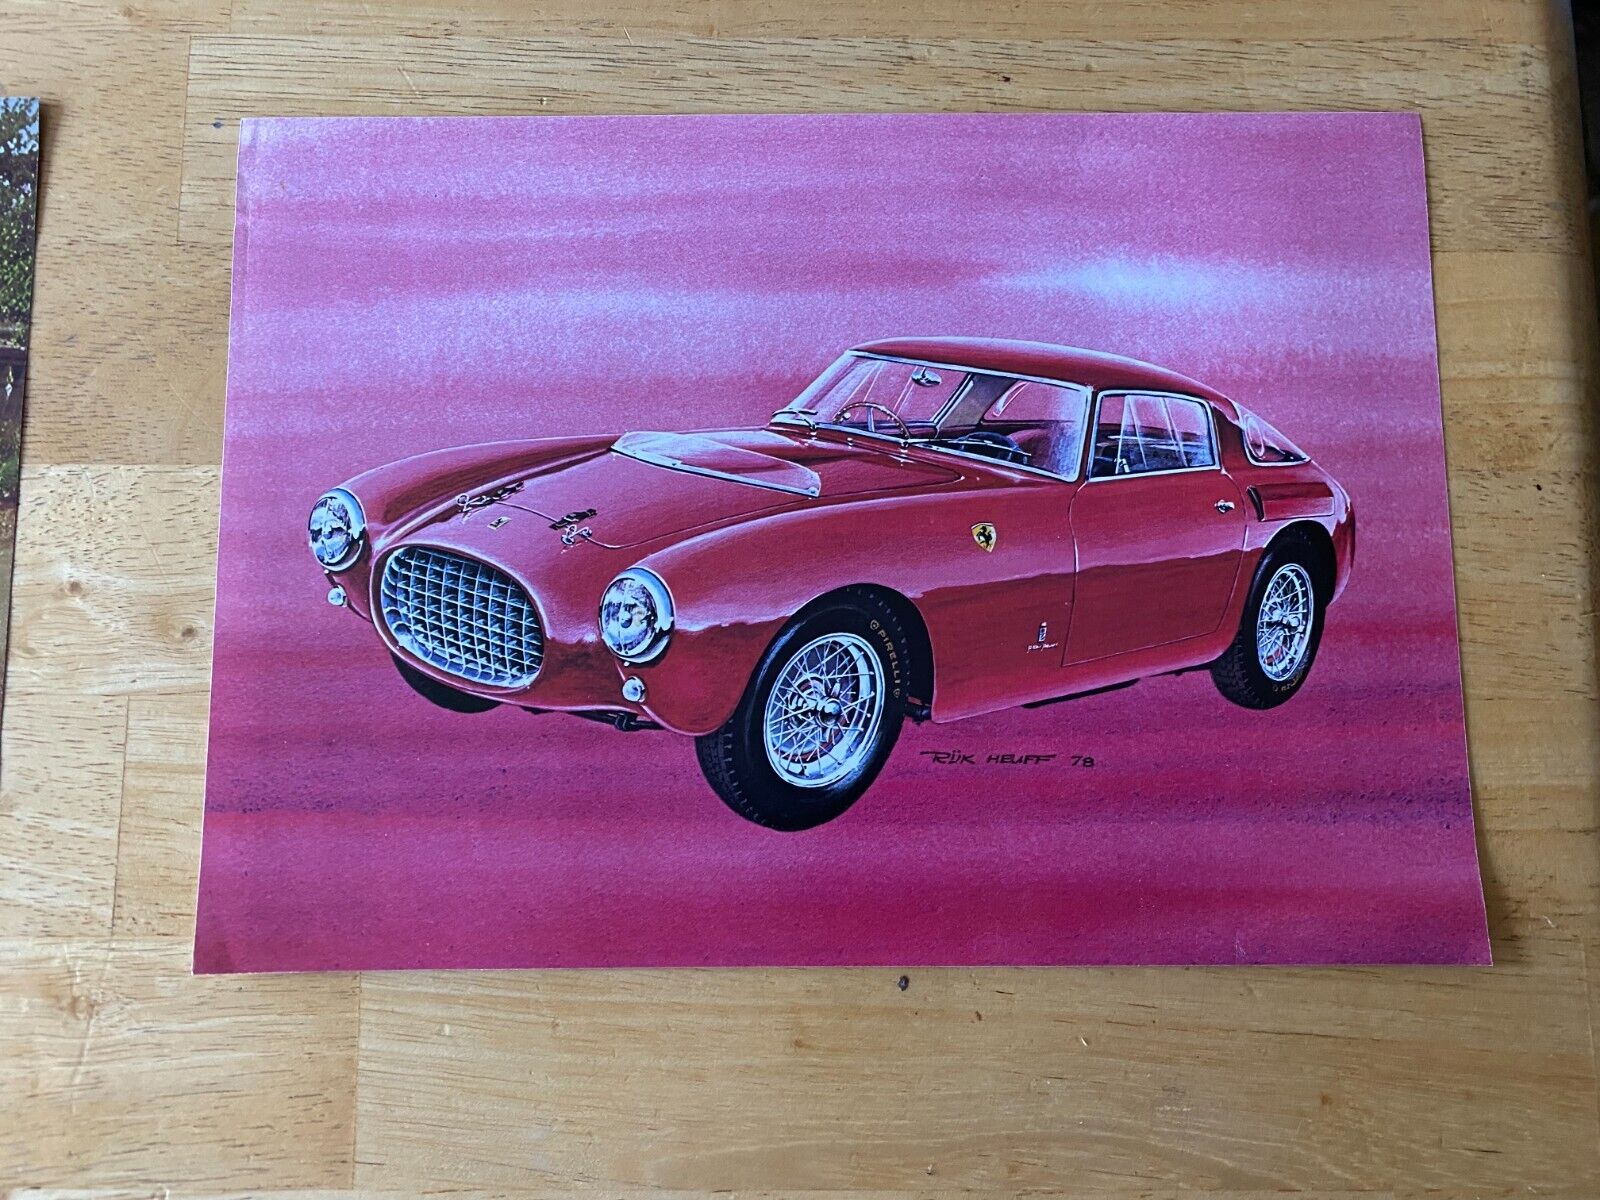 FERARRI 250 GT RED RUK HEUFF 1978 DRAWING POSTER ADVERT APPROX A4 SIZE H